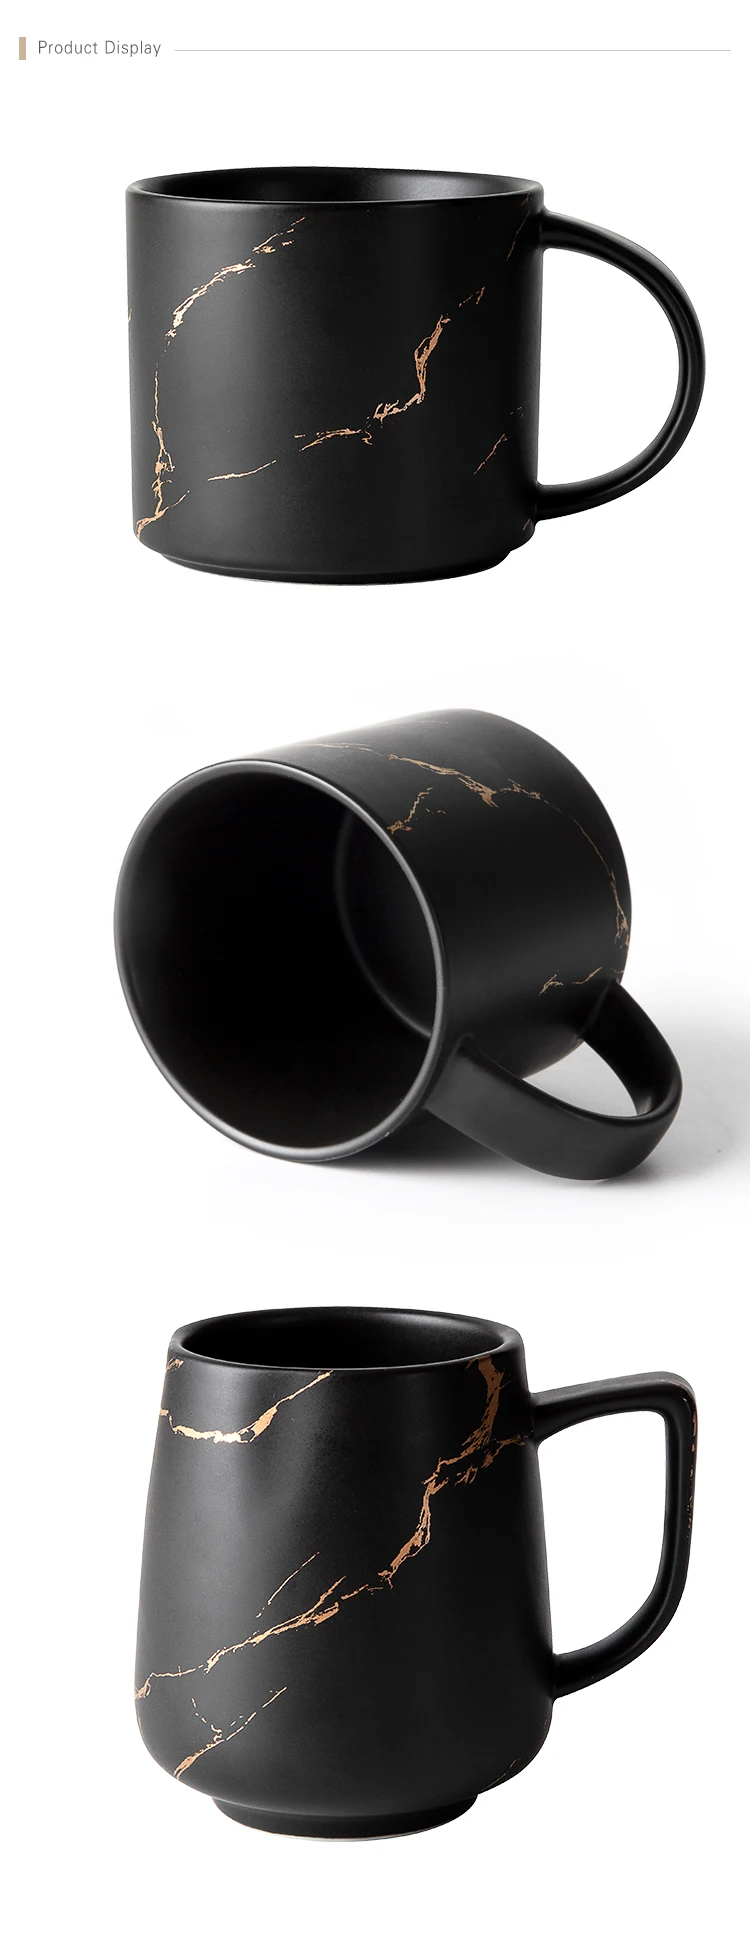 product-400ml 450ml Restaurant Hotel Cafe Use Black Gold Cafe Cup Mugs And Saucer, Black Coffee Mugs-1